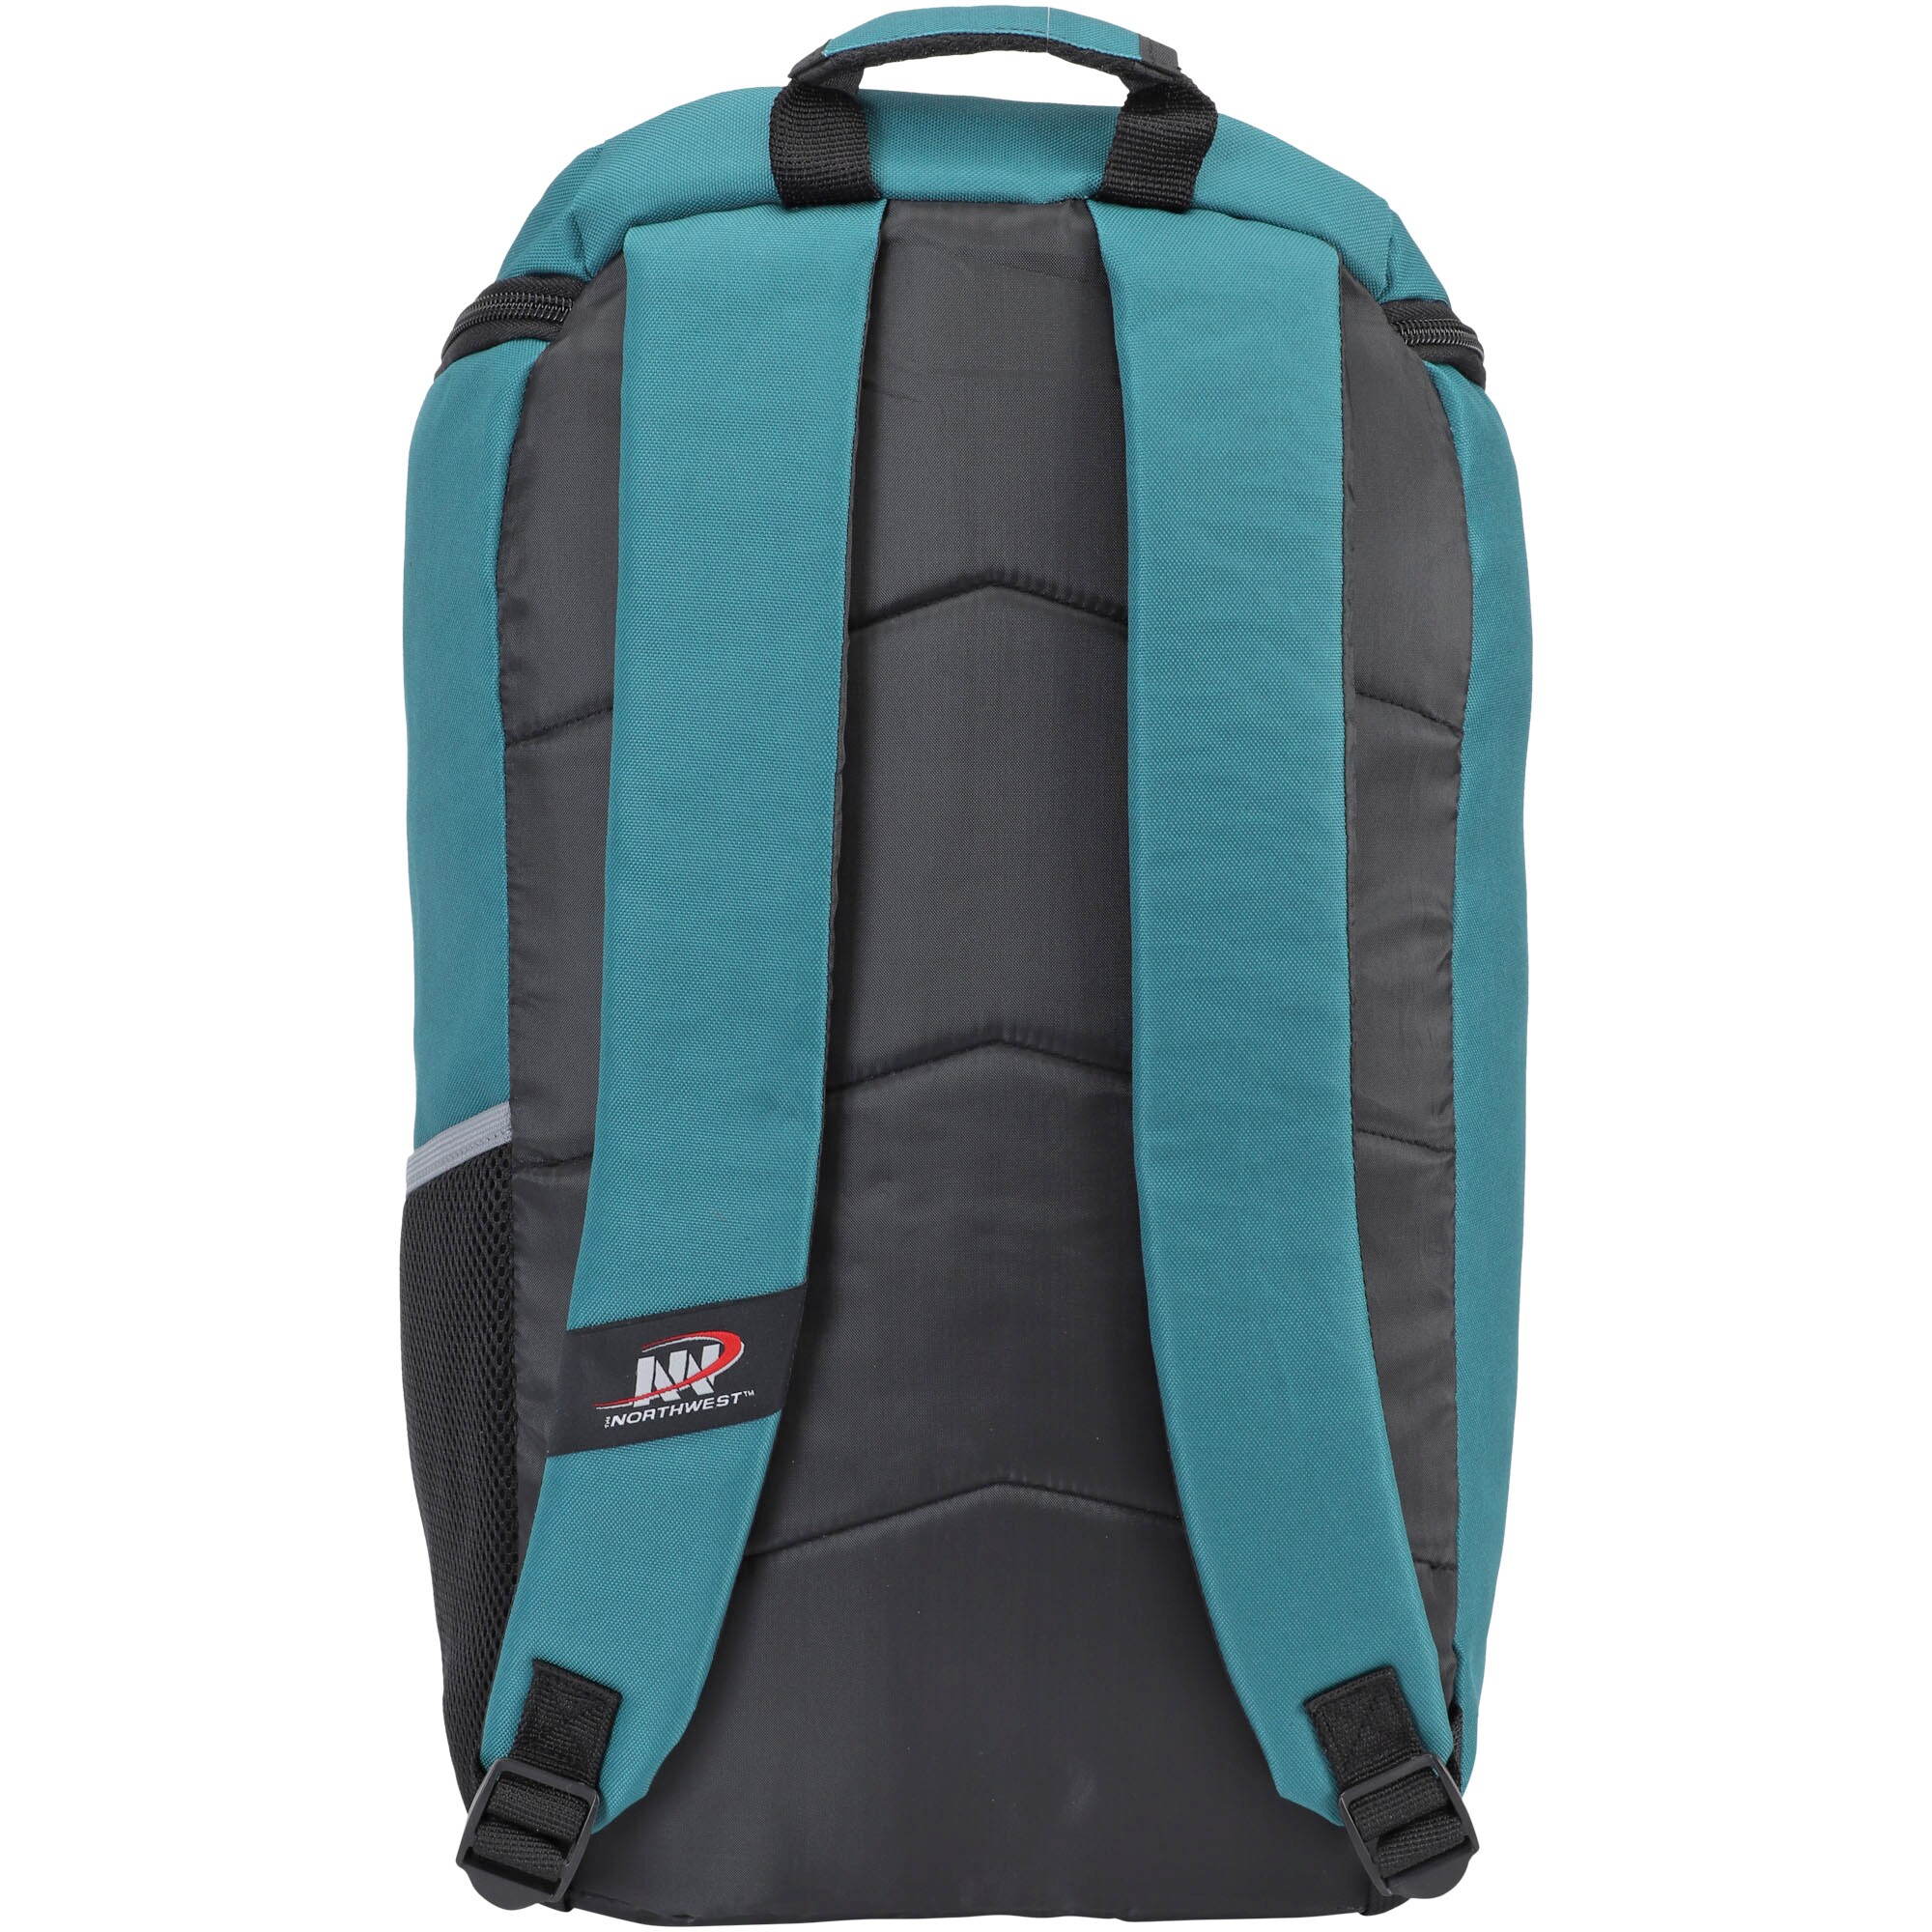 NFL Miami Dolphins "Competitor" Top-Loader Backpack, 19" x 7" x 12" - image 2 of 2